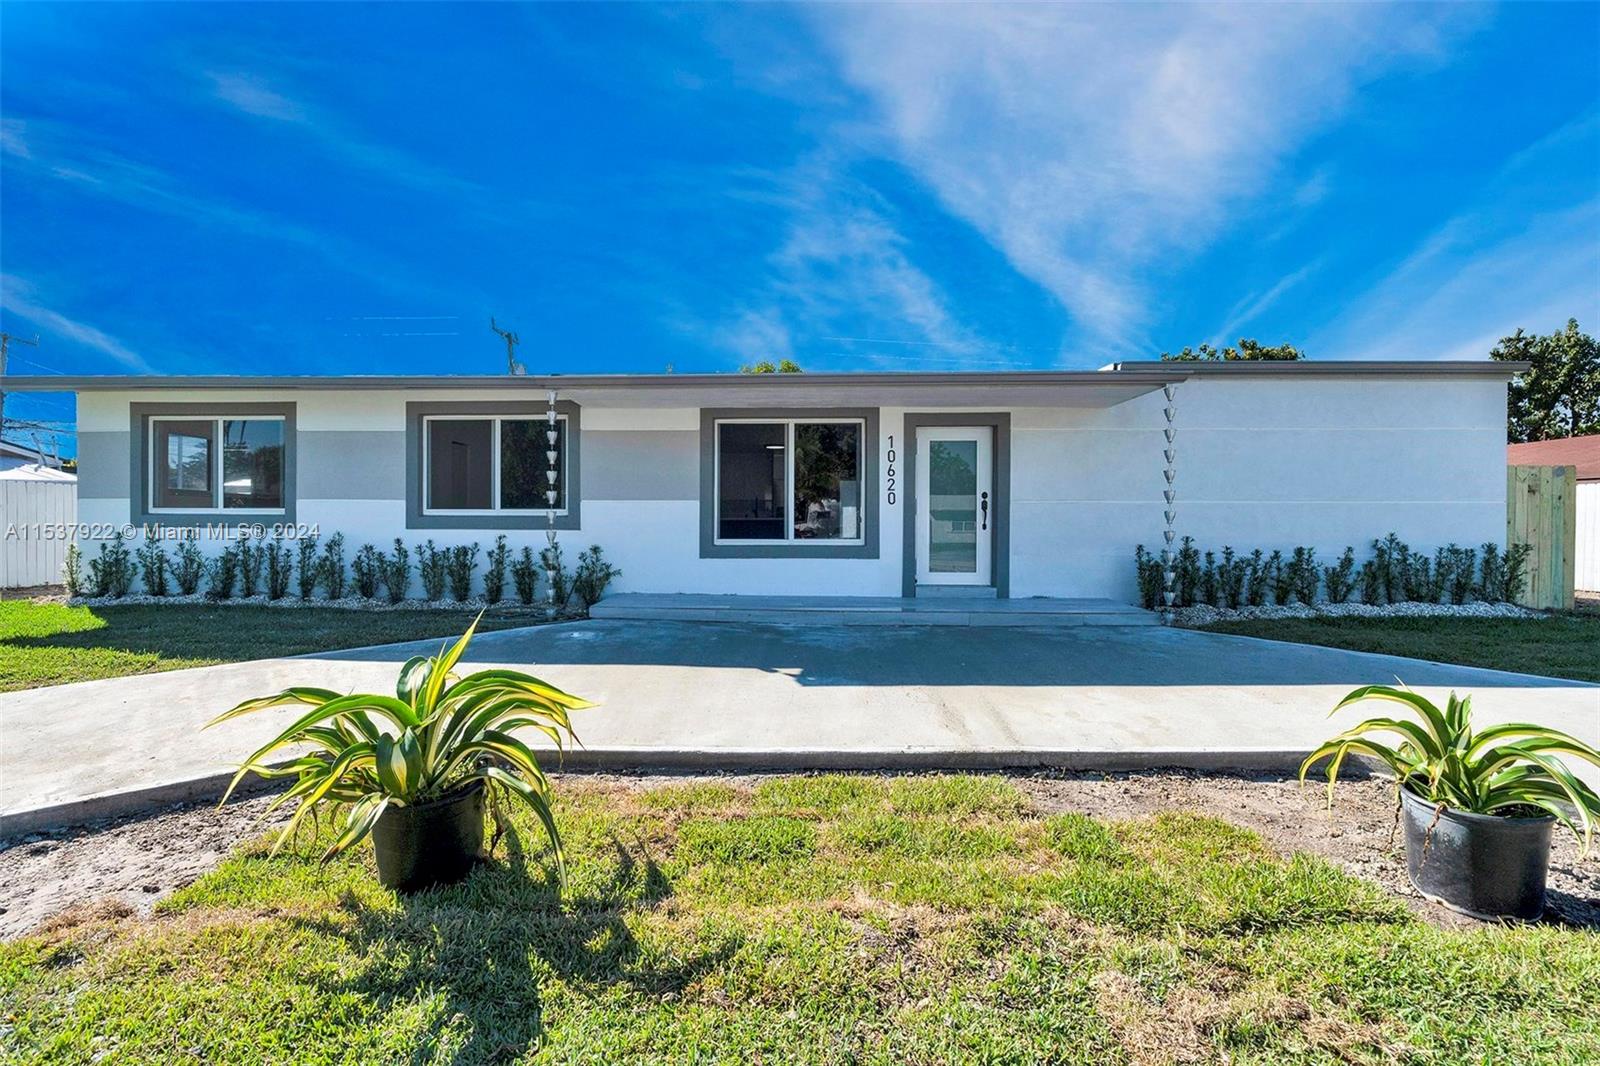 Welcome to your modern oasis in desirable Cutler Bay! This beautifully remodeled 3-bed, 2-bath home offers the perfect blend of modern style and comfort across 1,534 sqft of living space. Enjoy the convenience of all new features throughout, including a gorgeous kitchen, all new plumbing, electrical, porcelain floors, impact windows and doors, and a roof with plenty of life left. The spacious layout includes a legal addition of a flex space, perfect for a home office or even in-law quarter conversion. Step outside to your expansive backyard with space for a pool, boat, or RV, ideal for outdoor gatherings and entertaining. New circular driveway, new stucco and rain gutters add both functionality and curb appeal. Convenient access to highways, schools, and amenities.